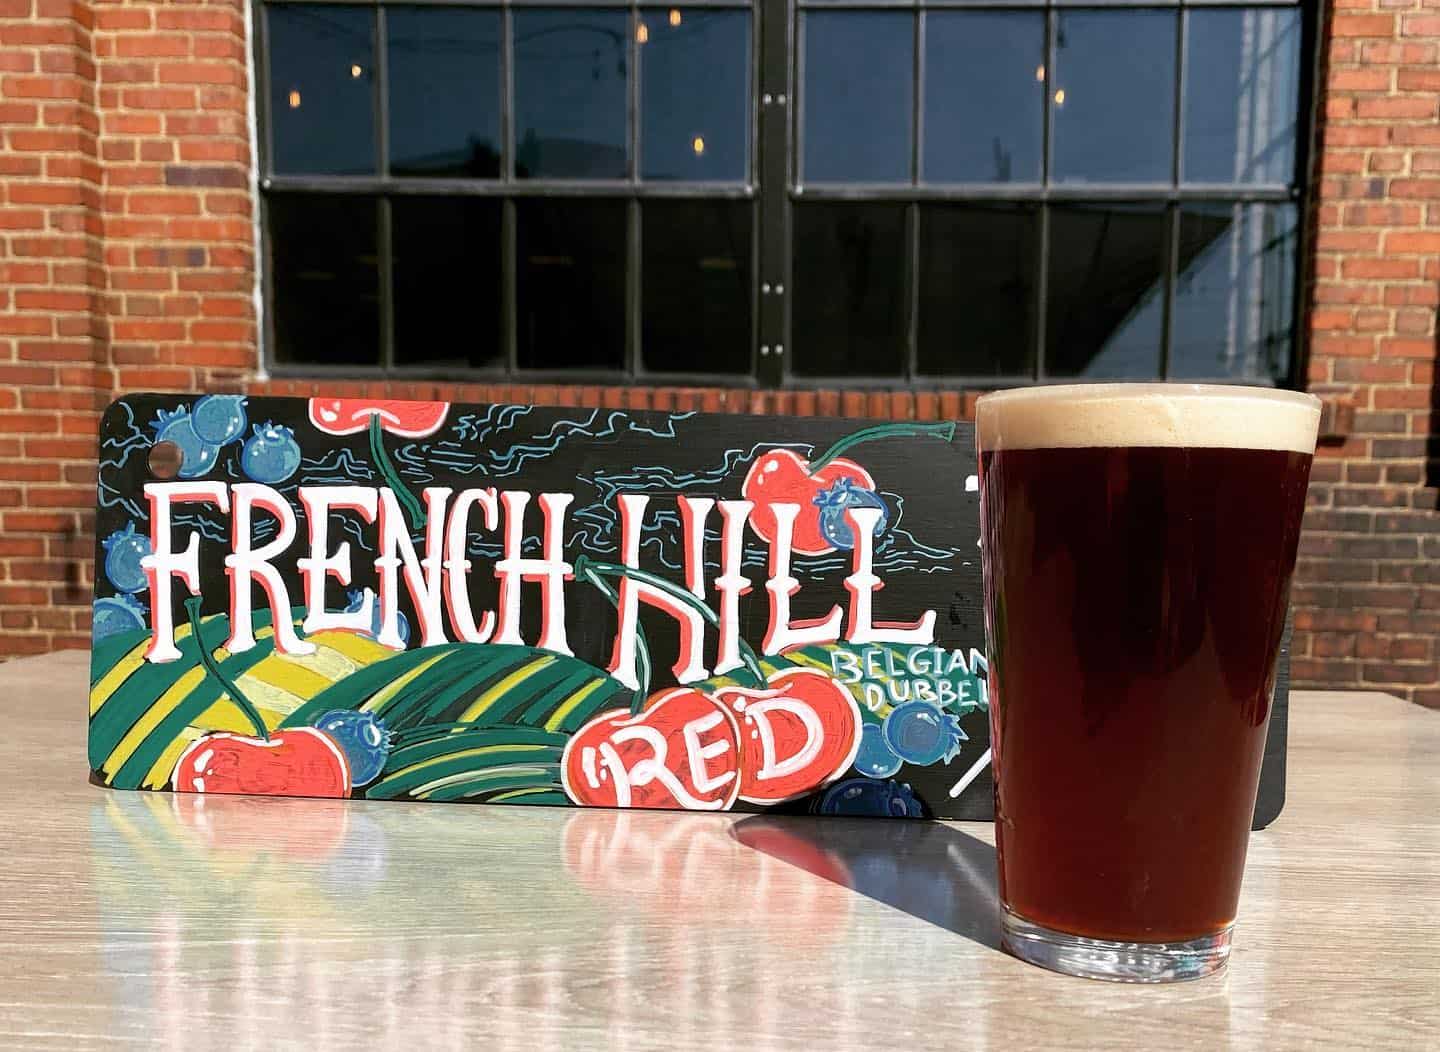 Hoodletown French Hill Red Belgian Dubbel